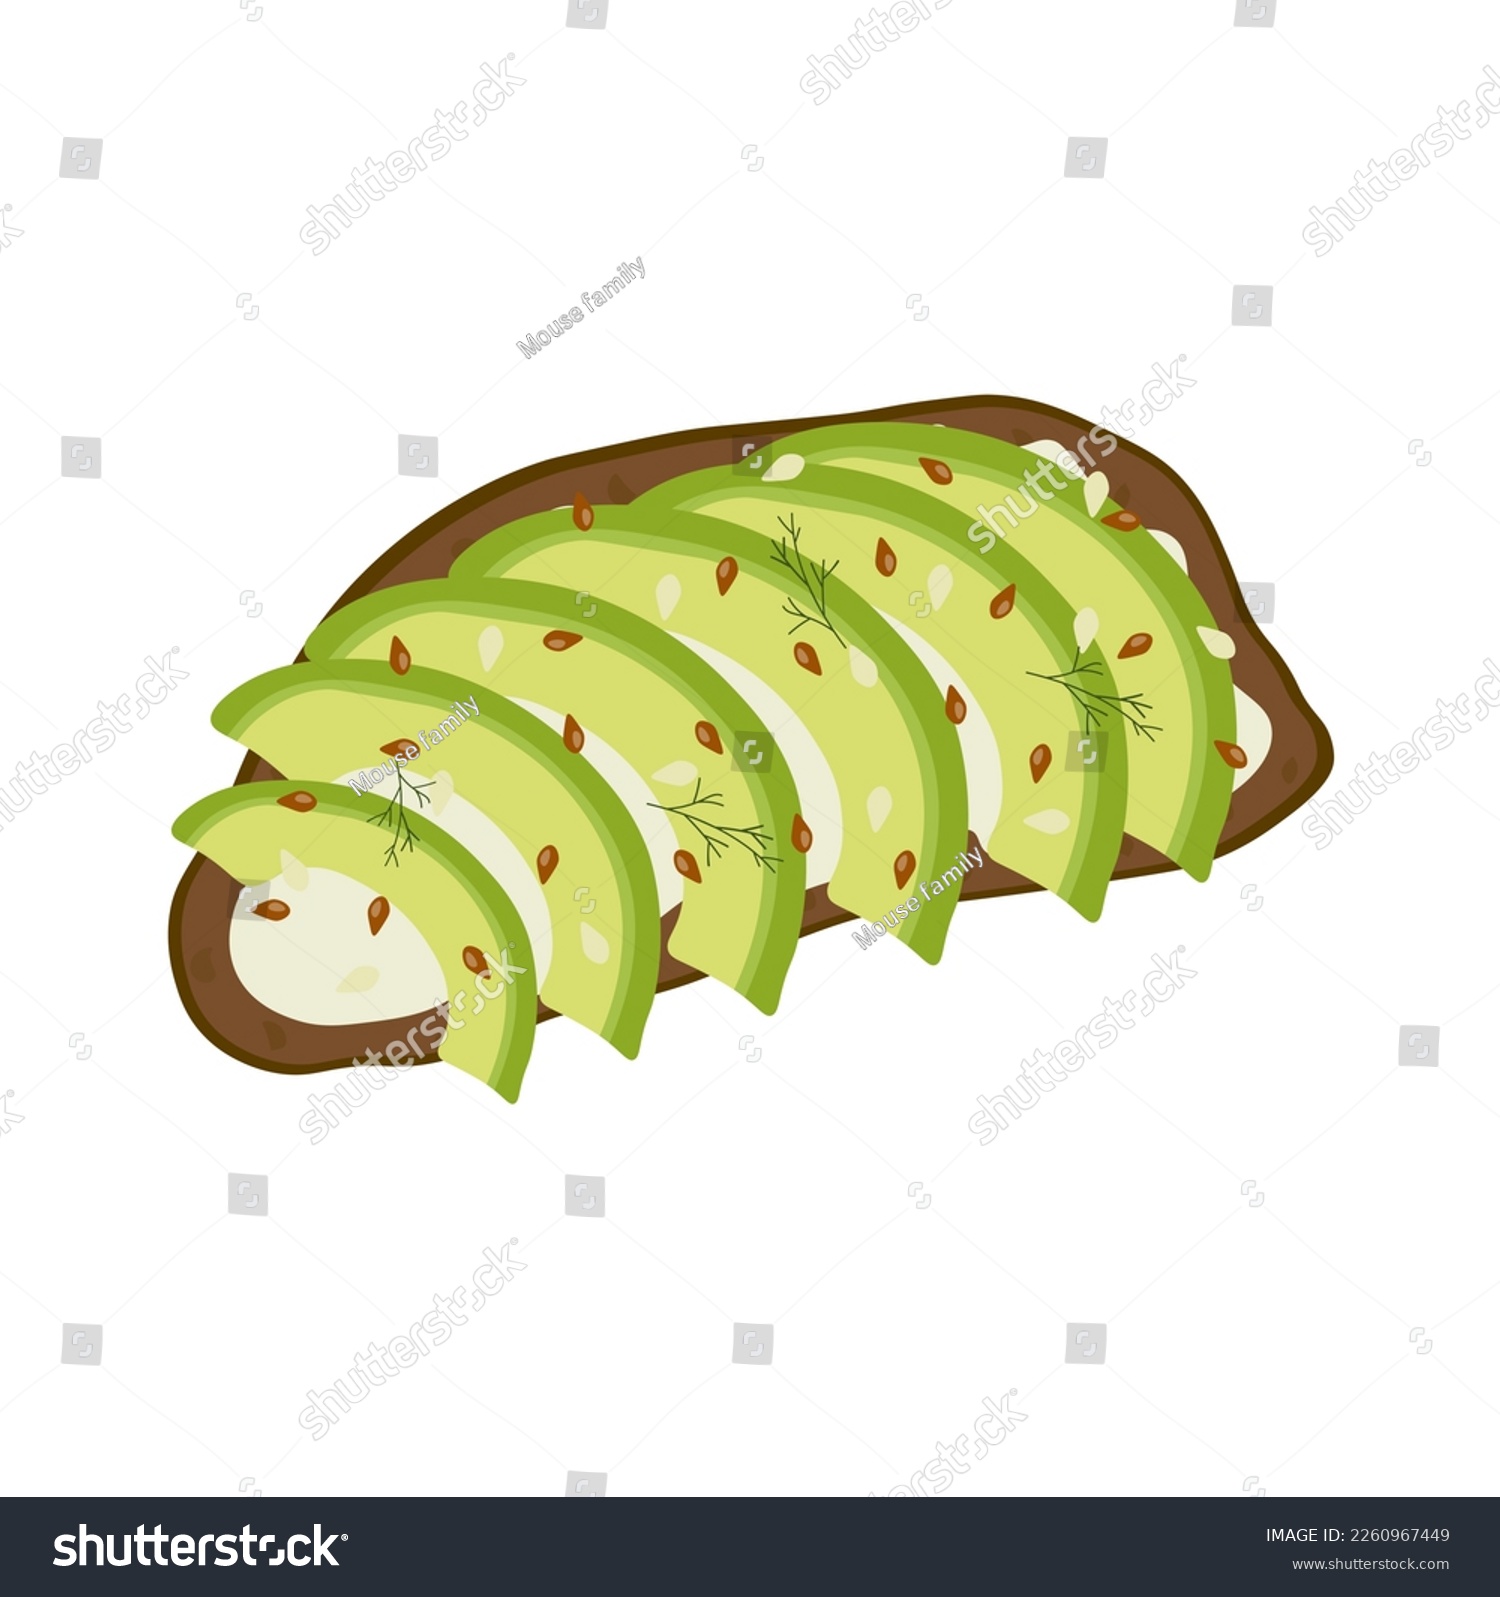 SVG of Avocado toast. Fresh toasted dark rye bread with slices of ripe avocado. Delicious avocado sandwich with sesame seeds, seasoning and dill. Vector illustration. svg